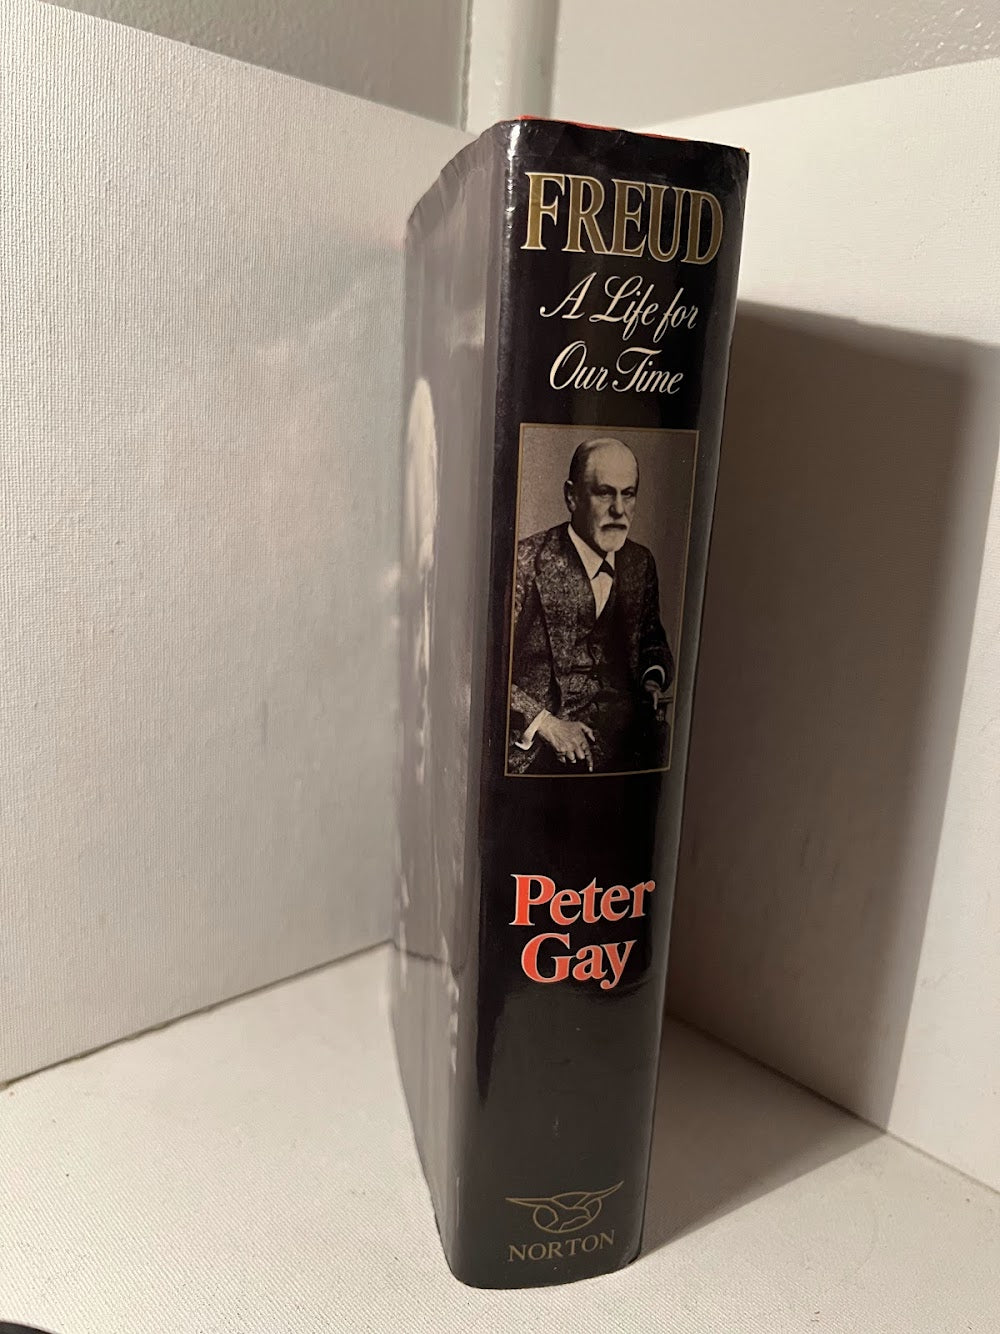 Freud: A Life For Our Time by Peter Gay